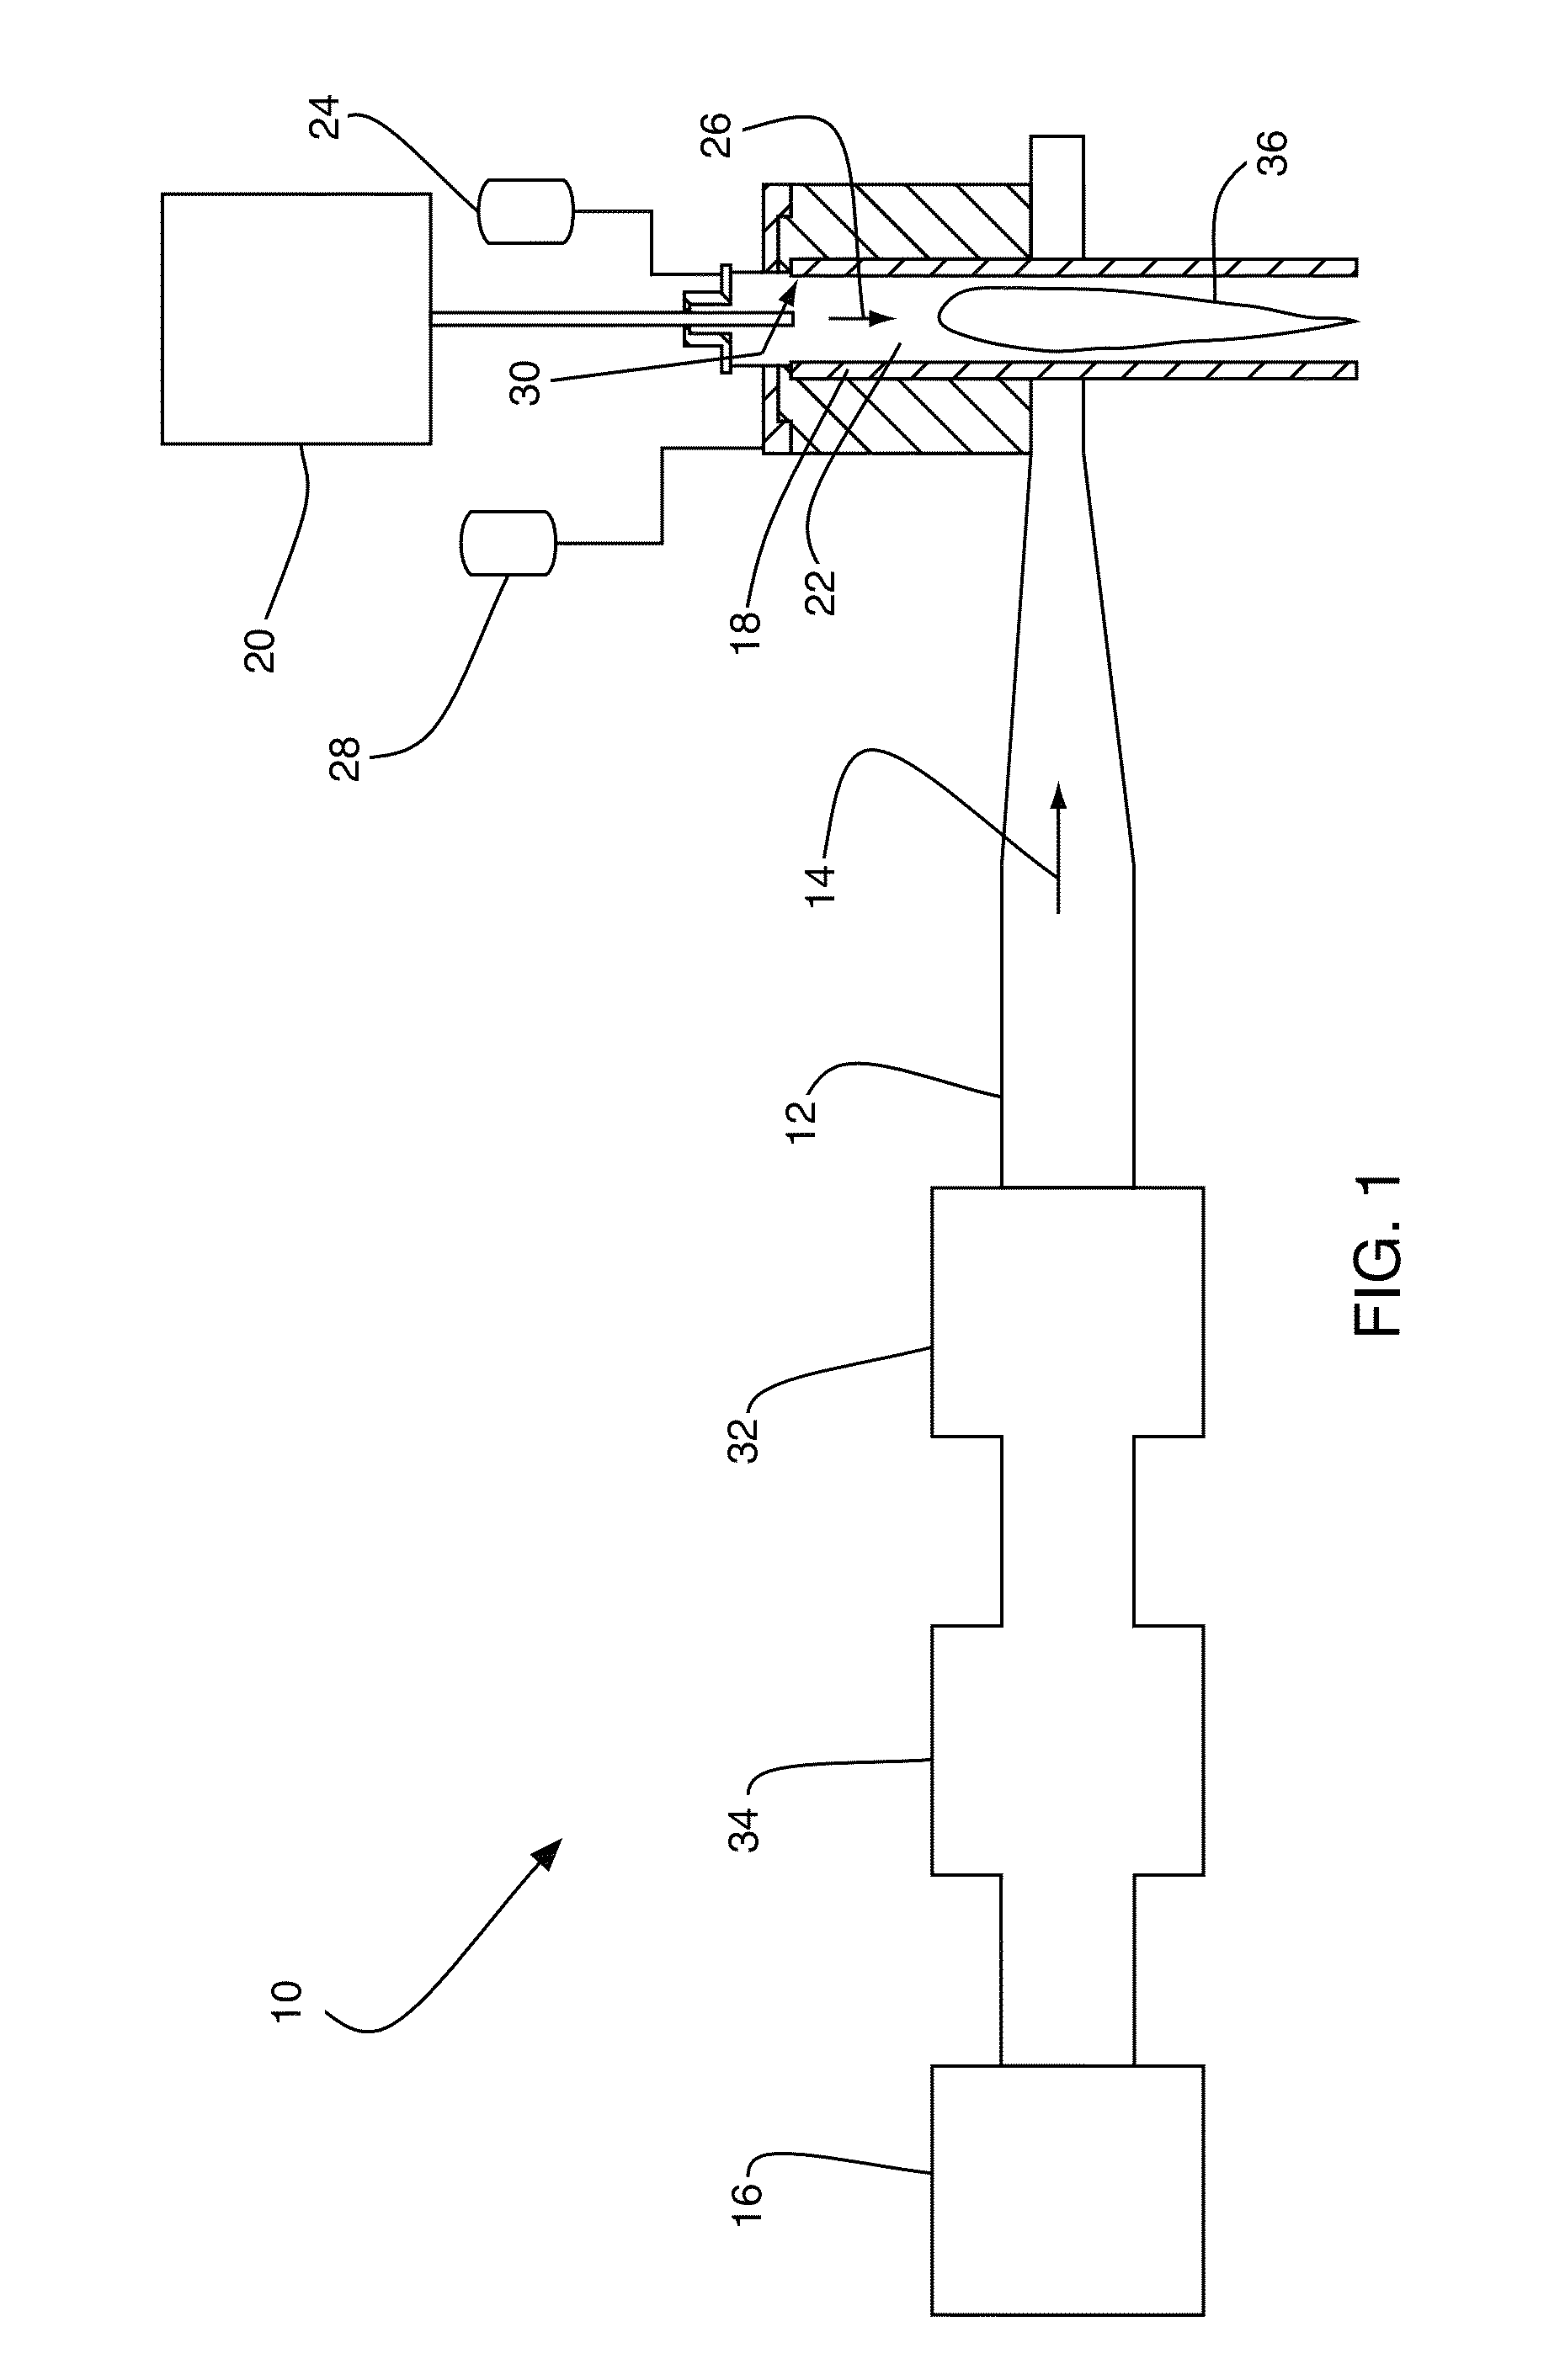 Microwave plasma apparatus and method for materials processing